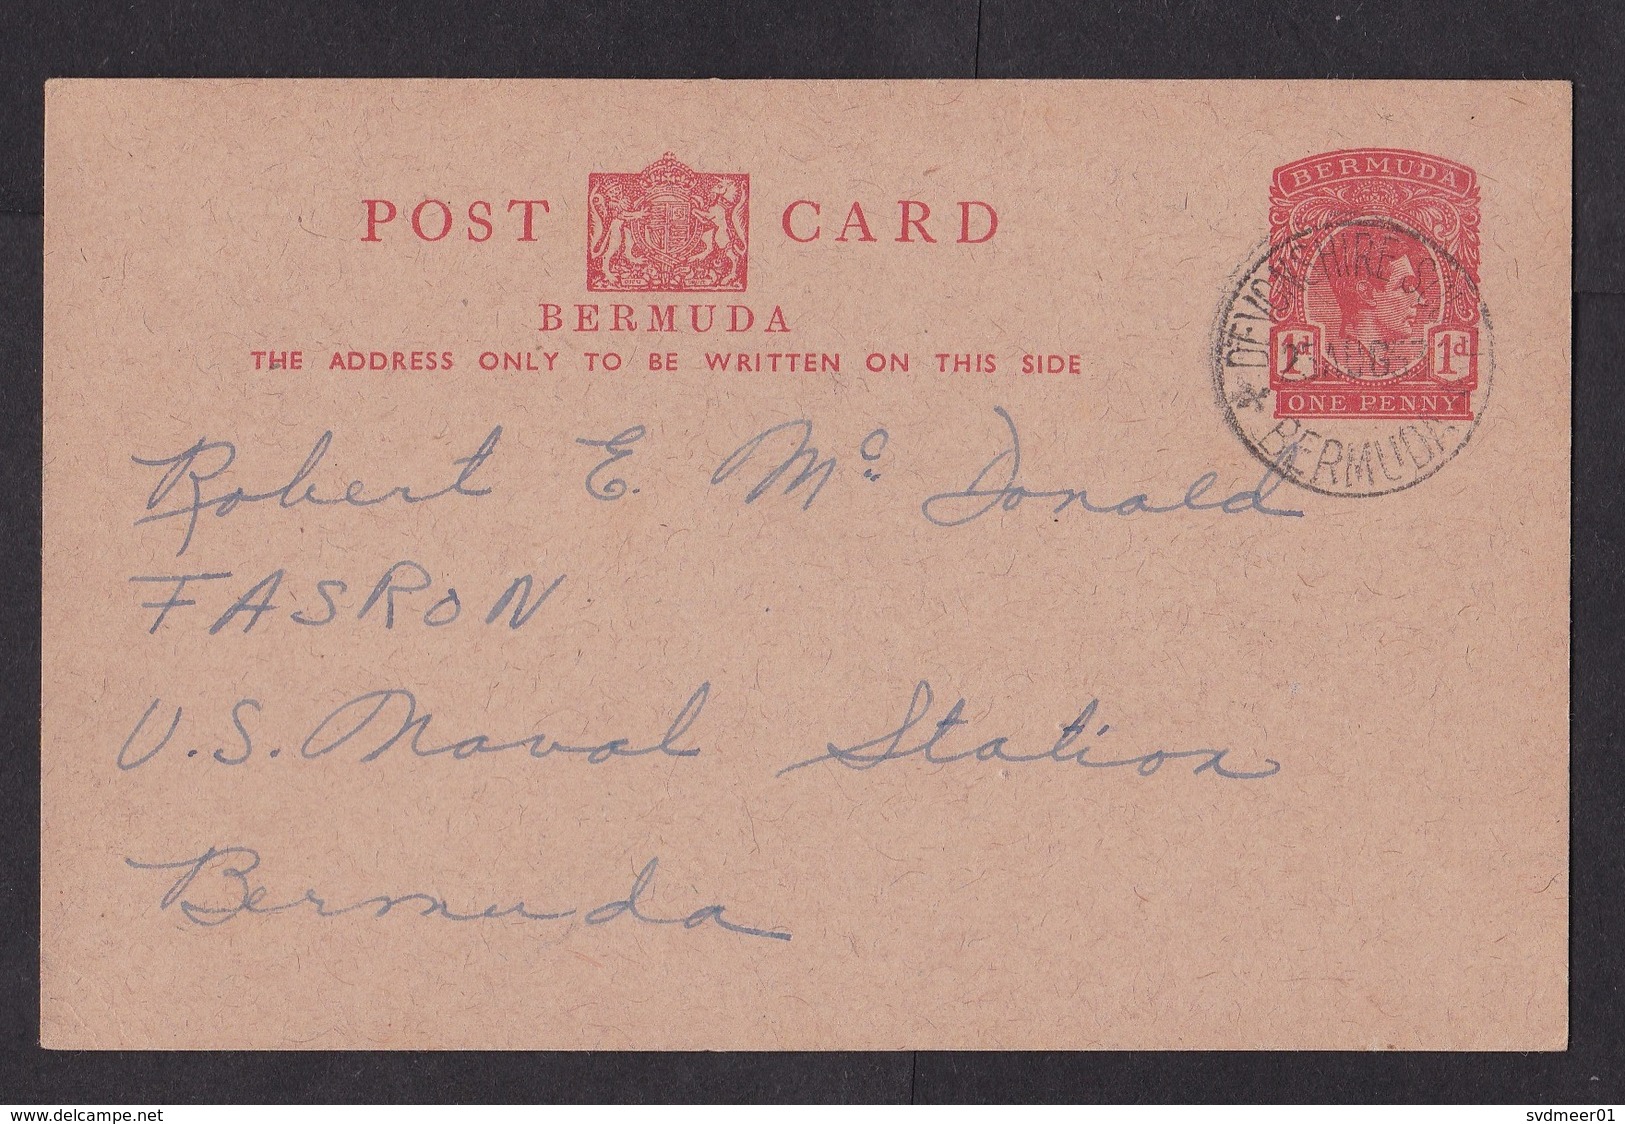 Bermuda: Stationery Postcard, 1953, King George VI, From Radio Society To US Naval Station (traces Of Use) - Bermudes